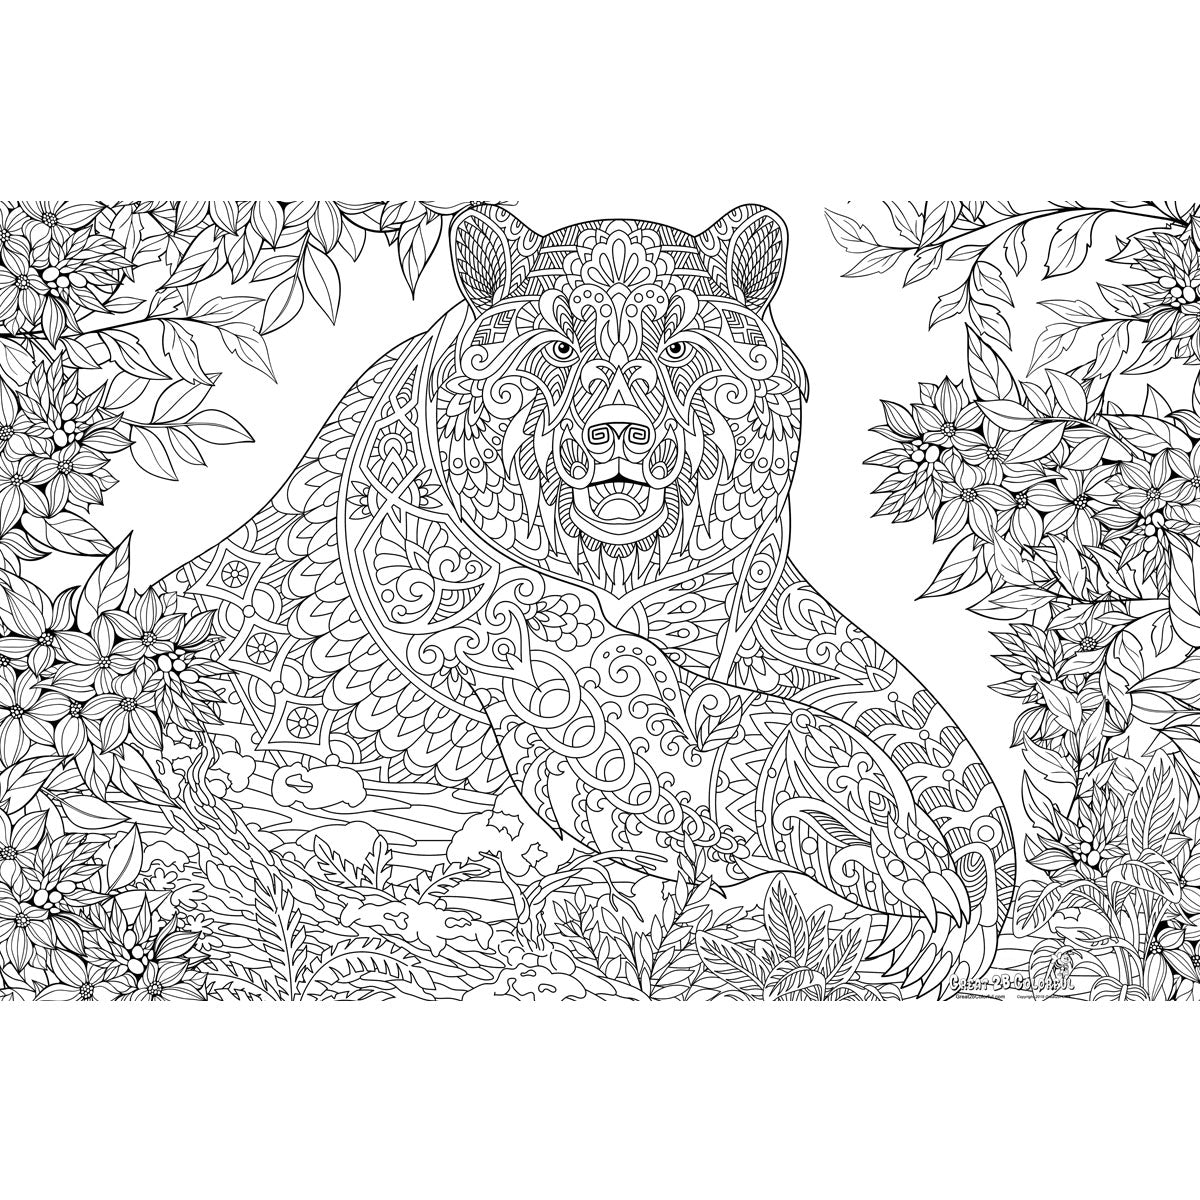 Great2bColorful - Northern Grizzly Coloring Poster